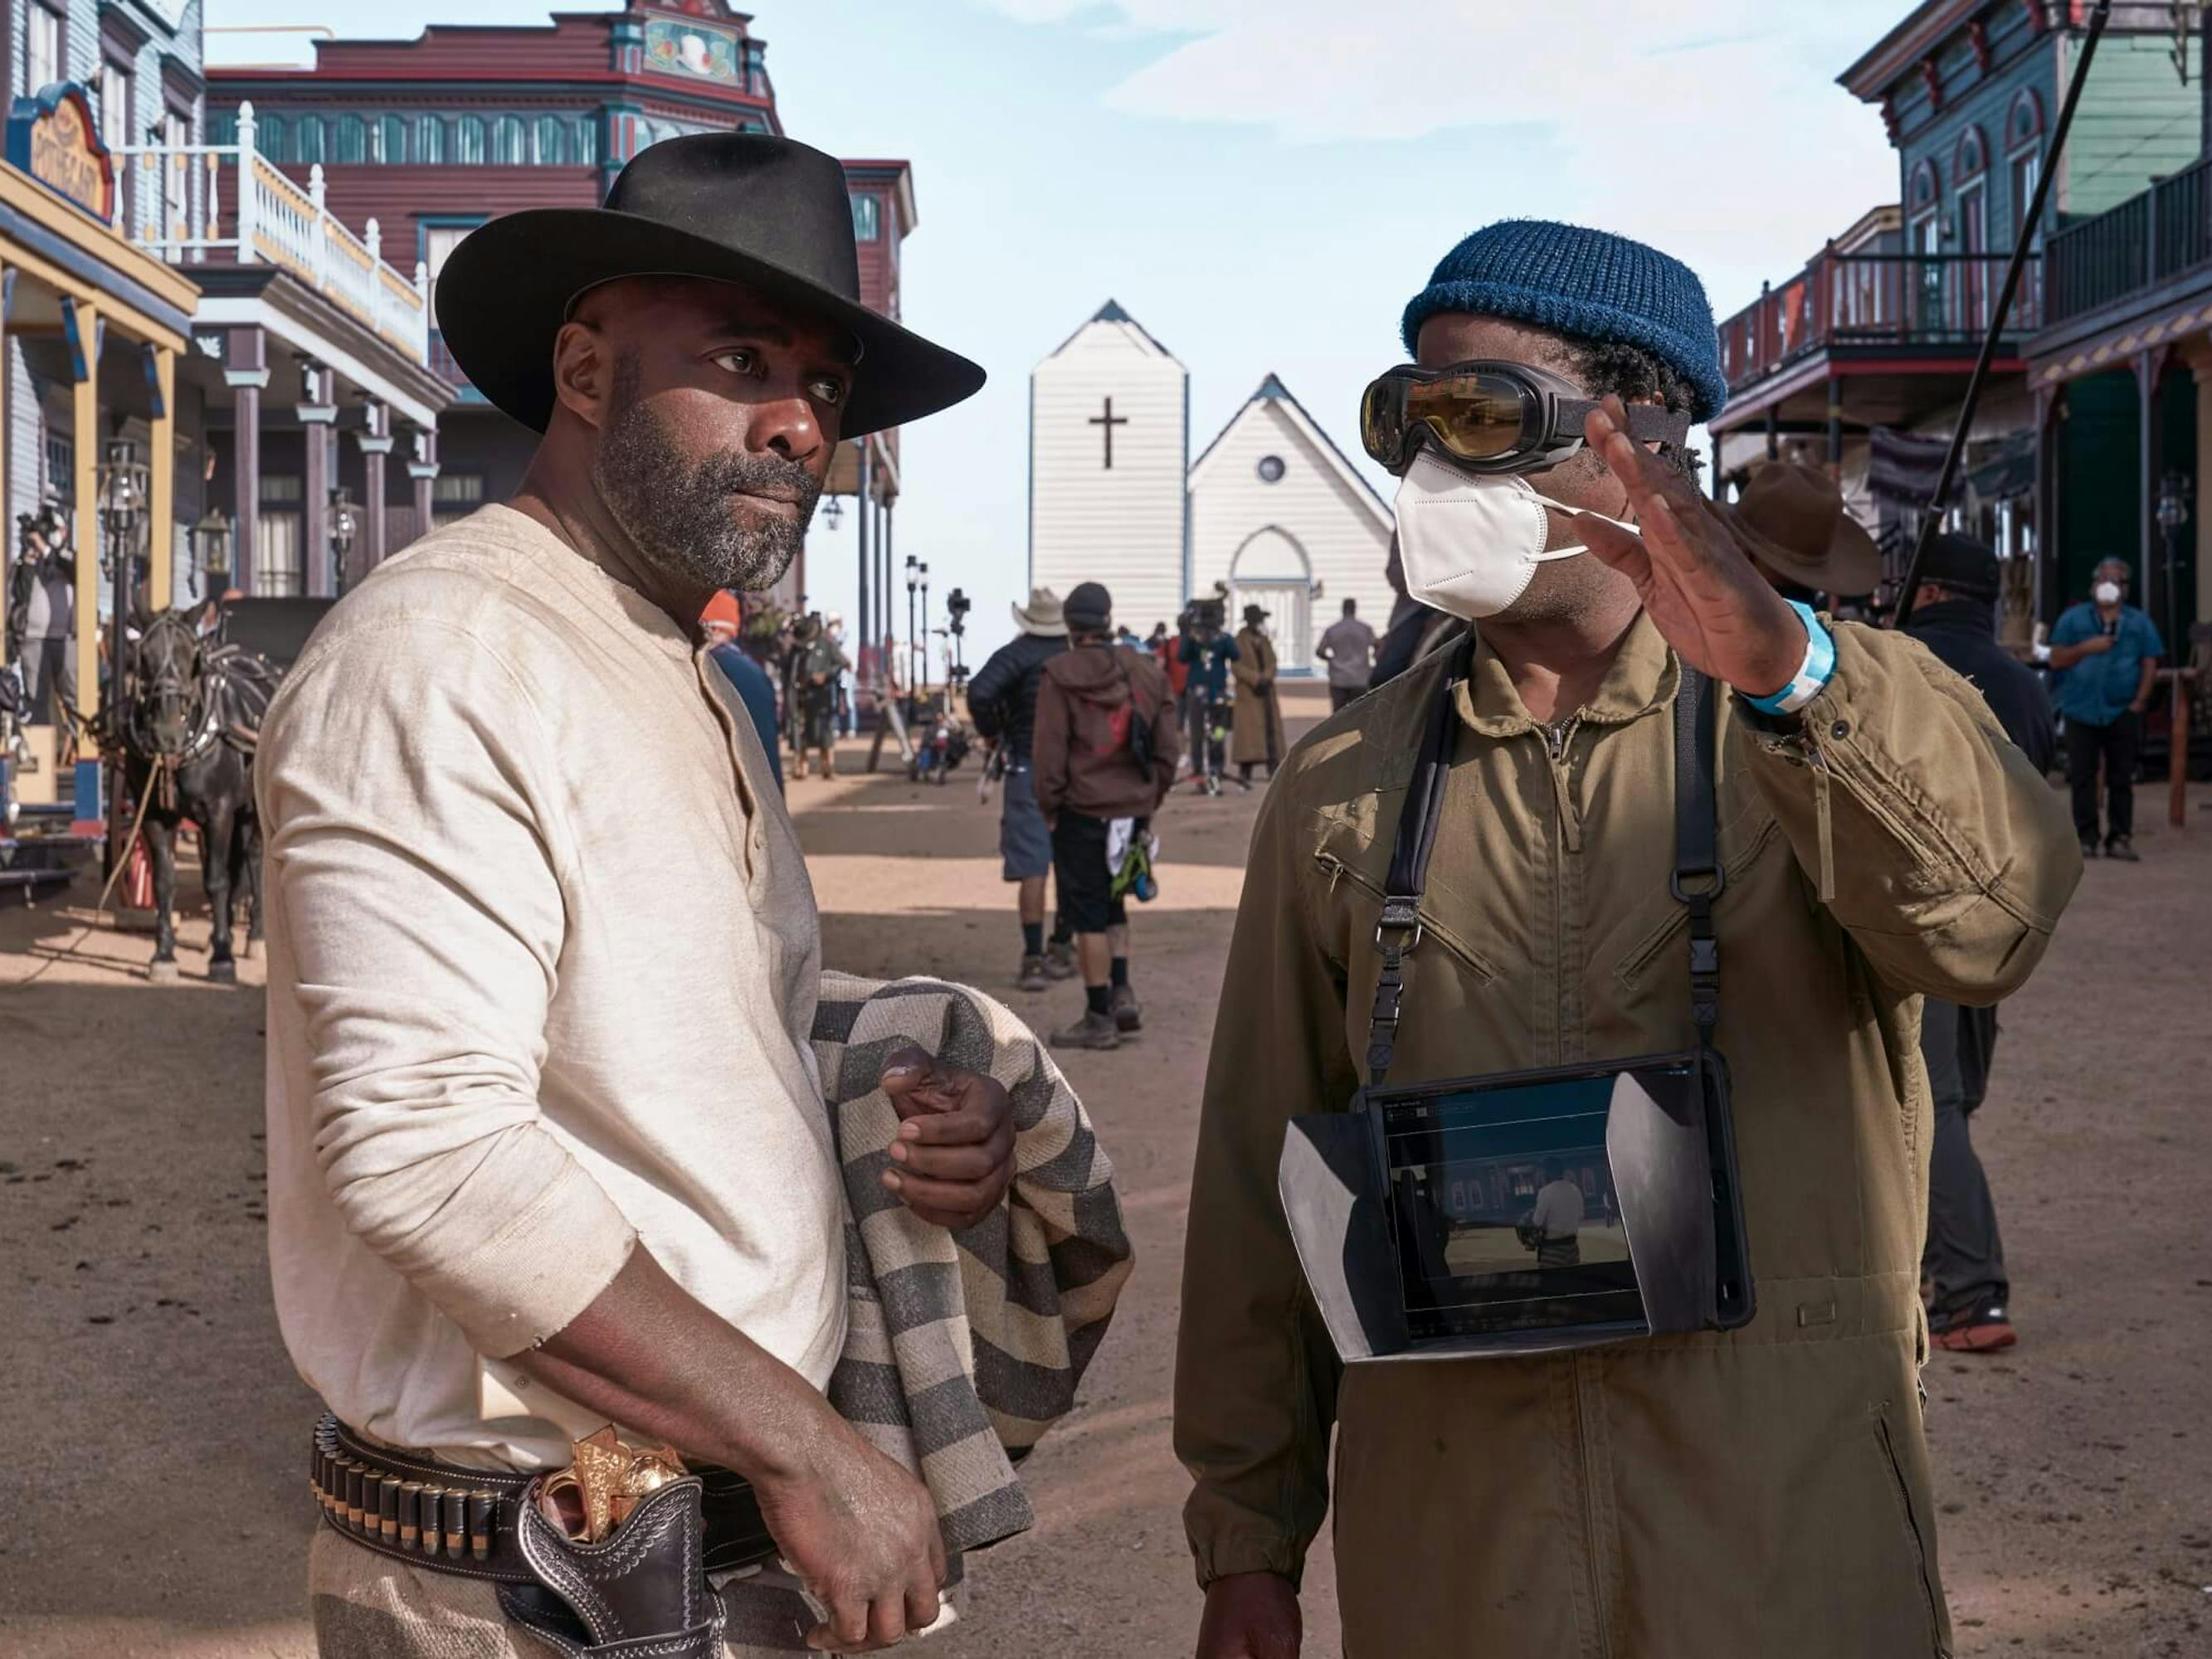 Idris Elba and Jeymes Samuel stand together on set. In the background is the chapel, and some storefronts. Elba wears a white shirt, dark hat, and carries his prison uniform in one arm. Samuel wears a tan jumpsuit and wears a teal beanie.